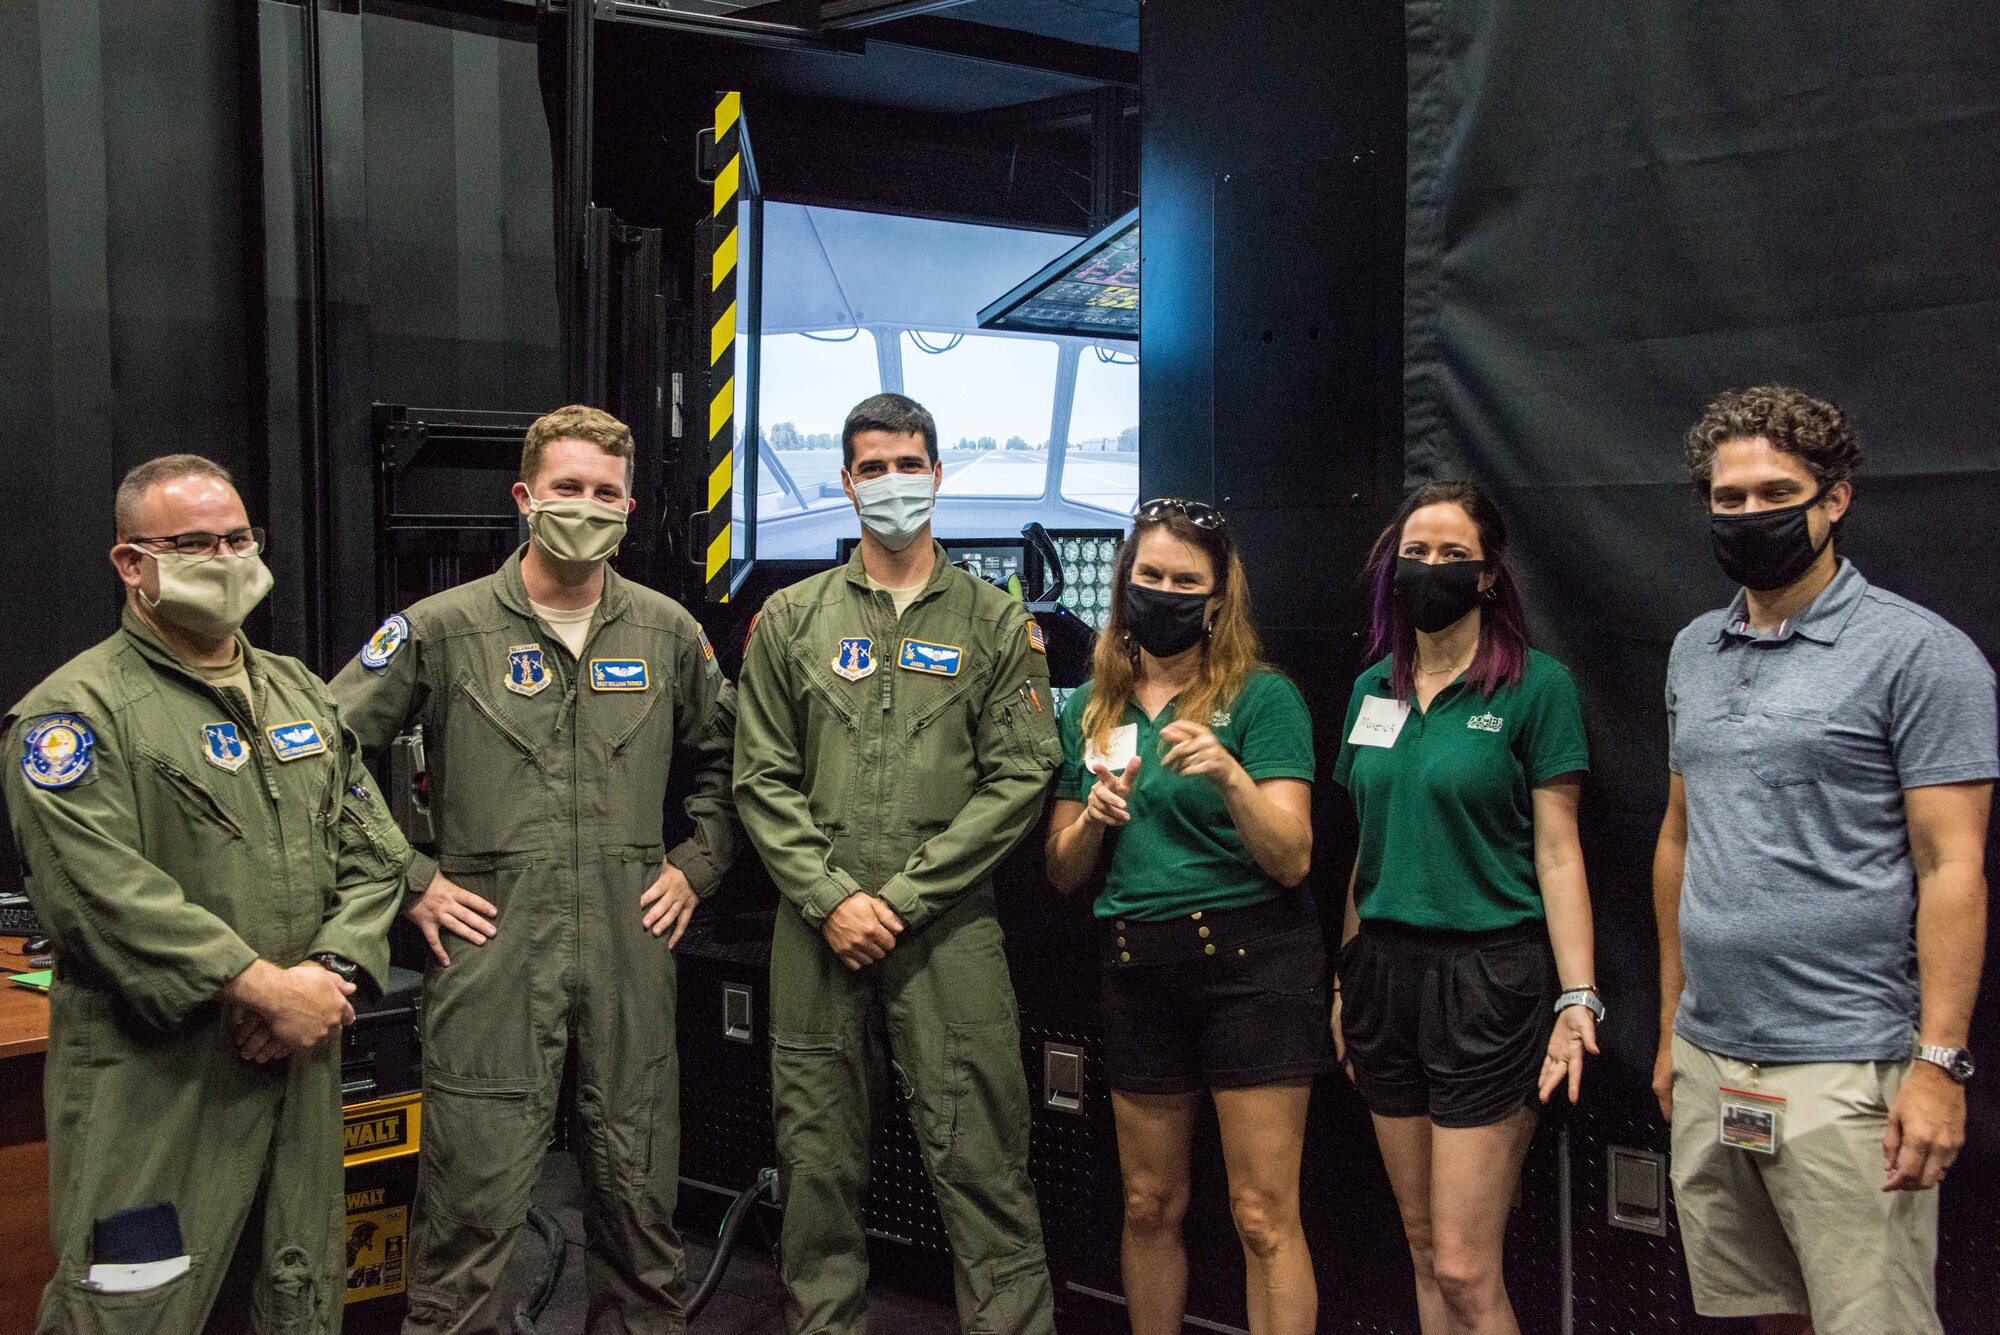 U.S. Air Force Master Sgt. Steve Verdinelli, Staff Sgt. William Turner and U.S. Air Force First Lt. Jason Waters in front of the C-130 flight simulator with Dover Public Library staff members (left to right) Heather Bernat, Susan Elizabeth Cordle and Nicholas Coll, July 29, 2020 at New Castle Air National Guard base, Del. Members of the library staff visited the wing to live-stream an episode of their Tour a Truck educational series.